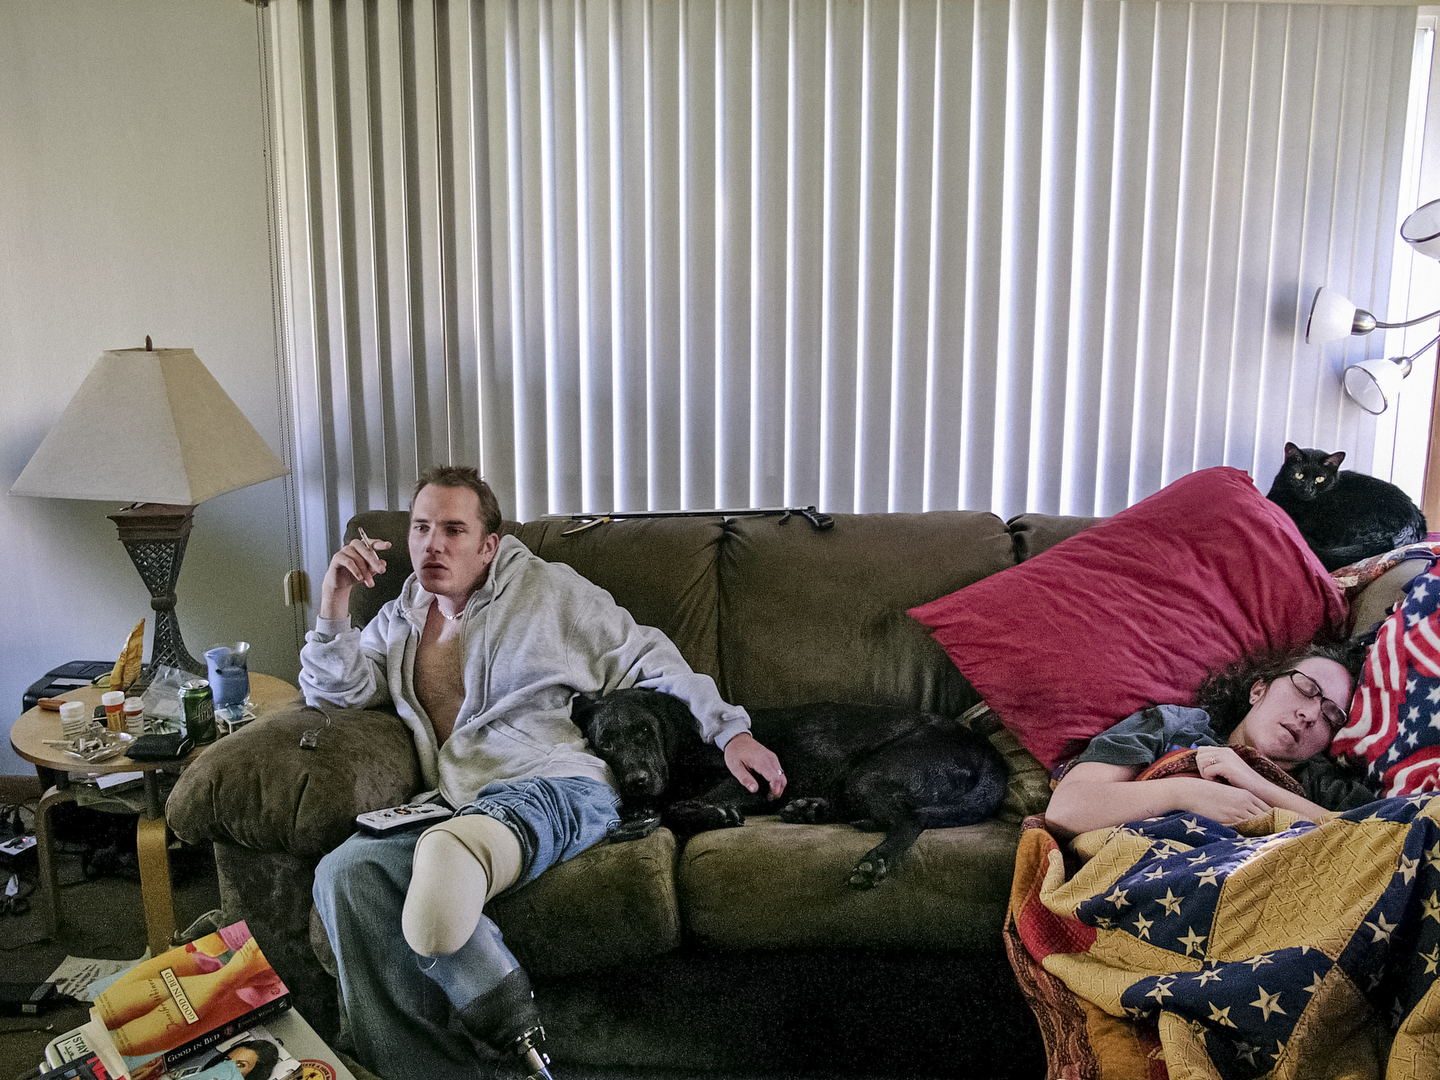 Wisconsin, 2007. Raymond Hubbard and his wife Sarah at home. They divorced two years later.